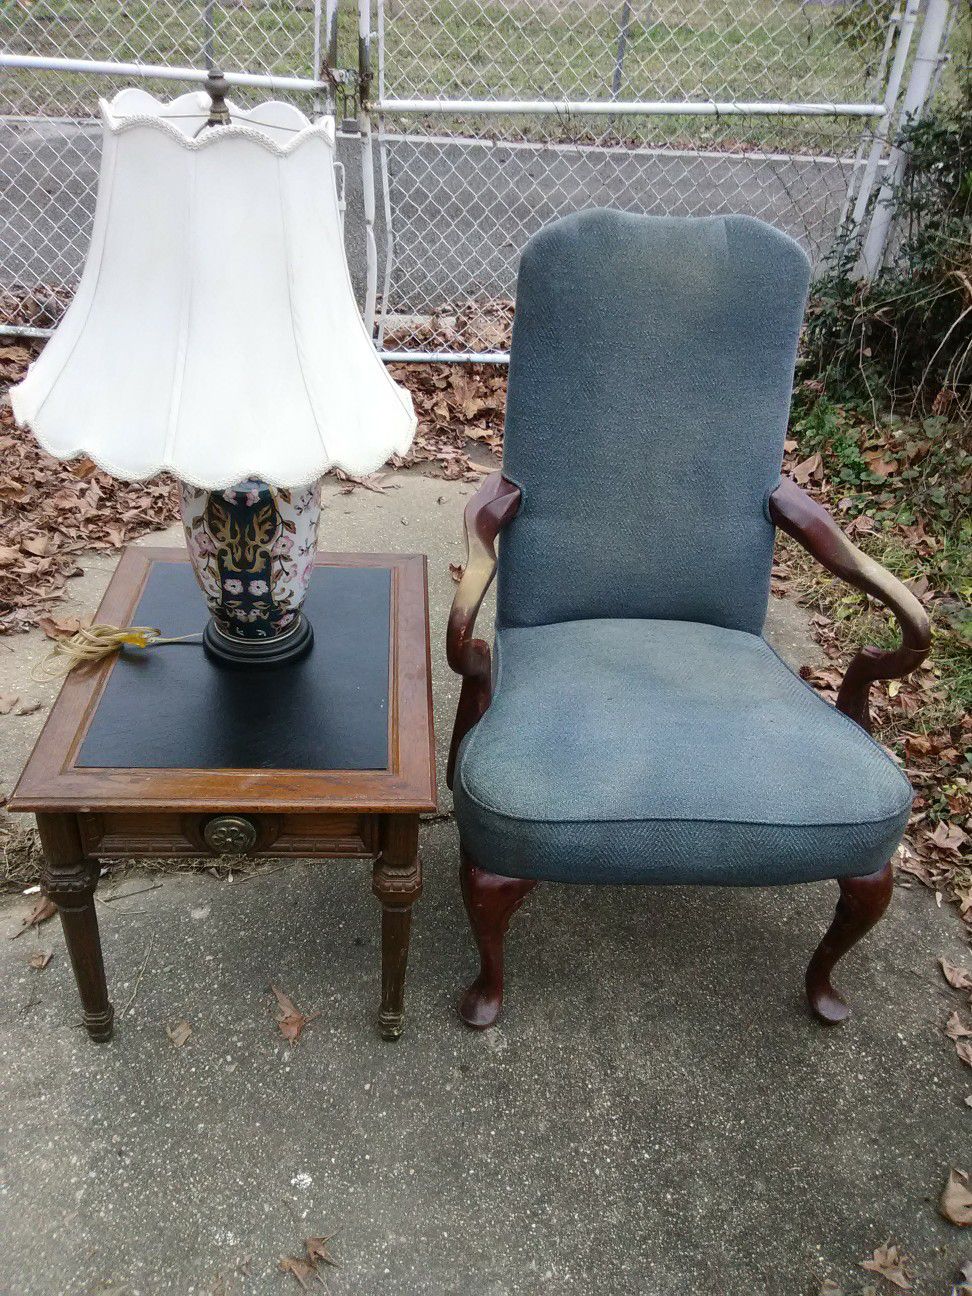 Antique chair with table and lamp